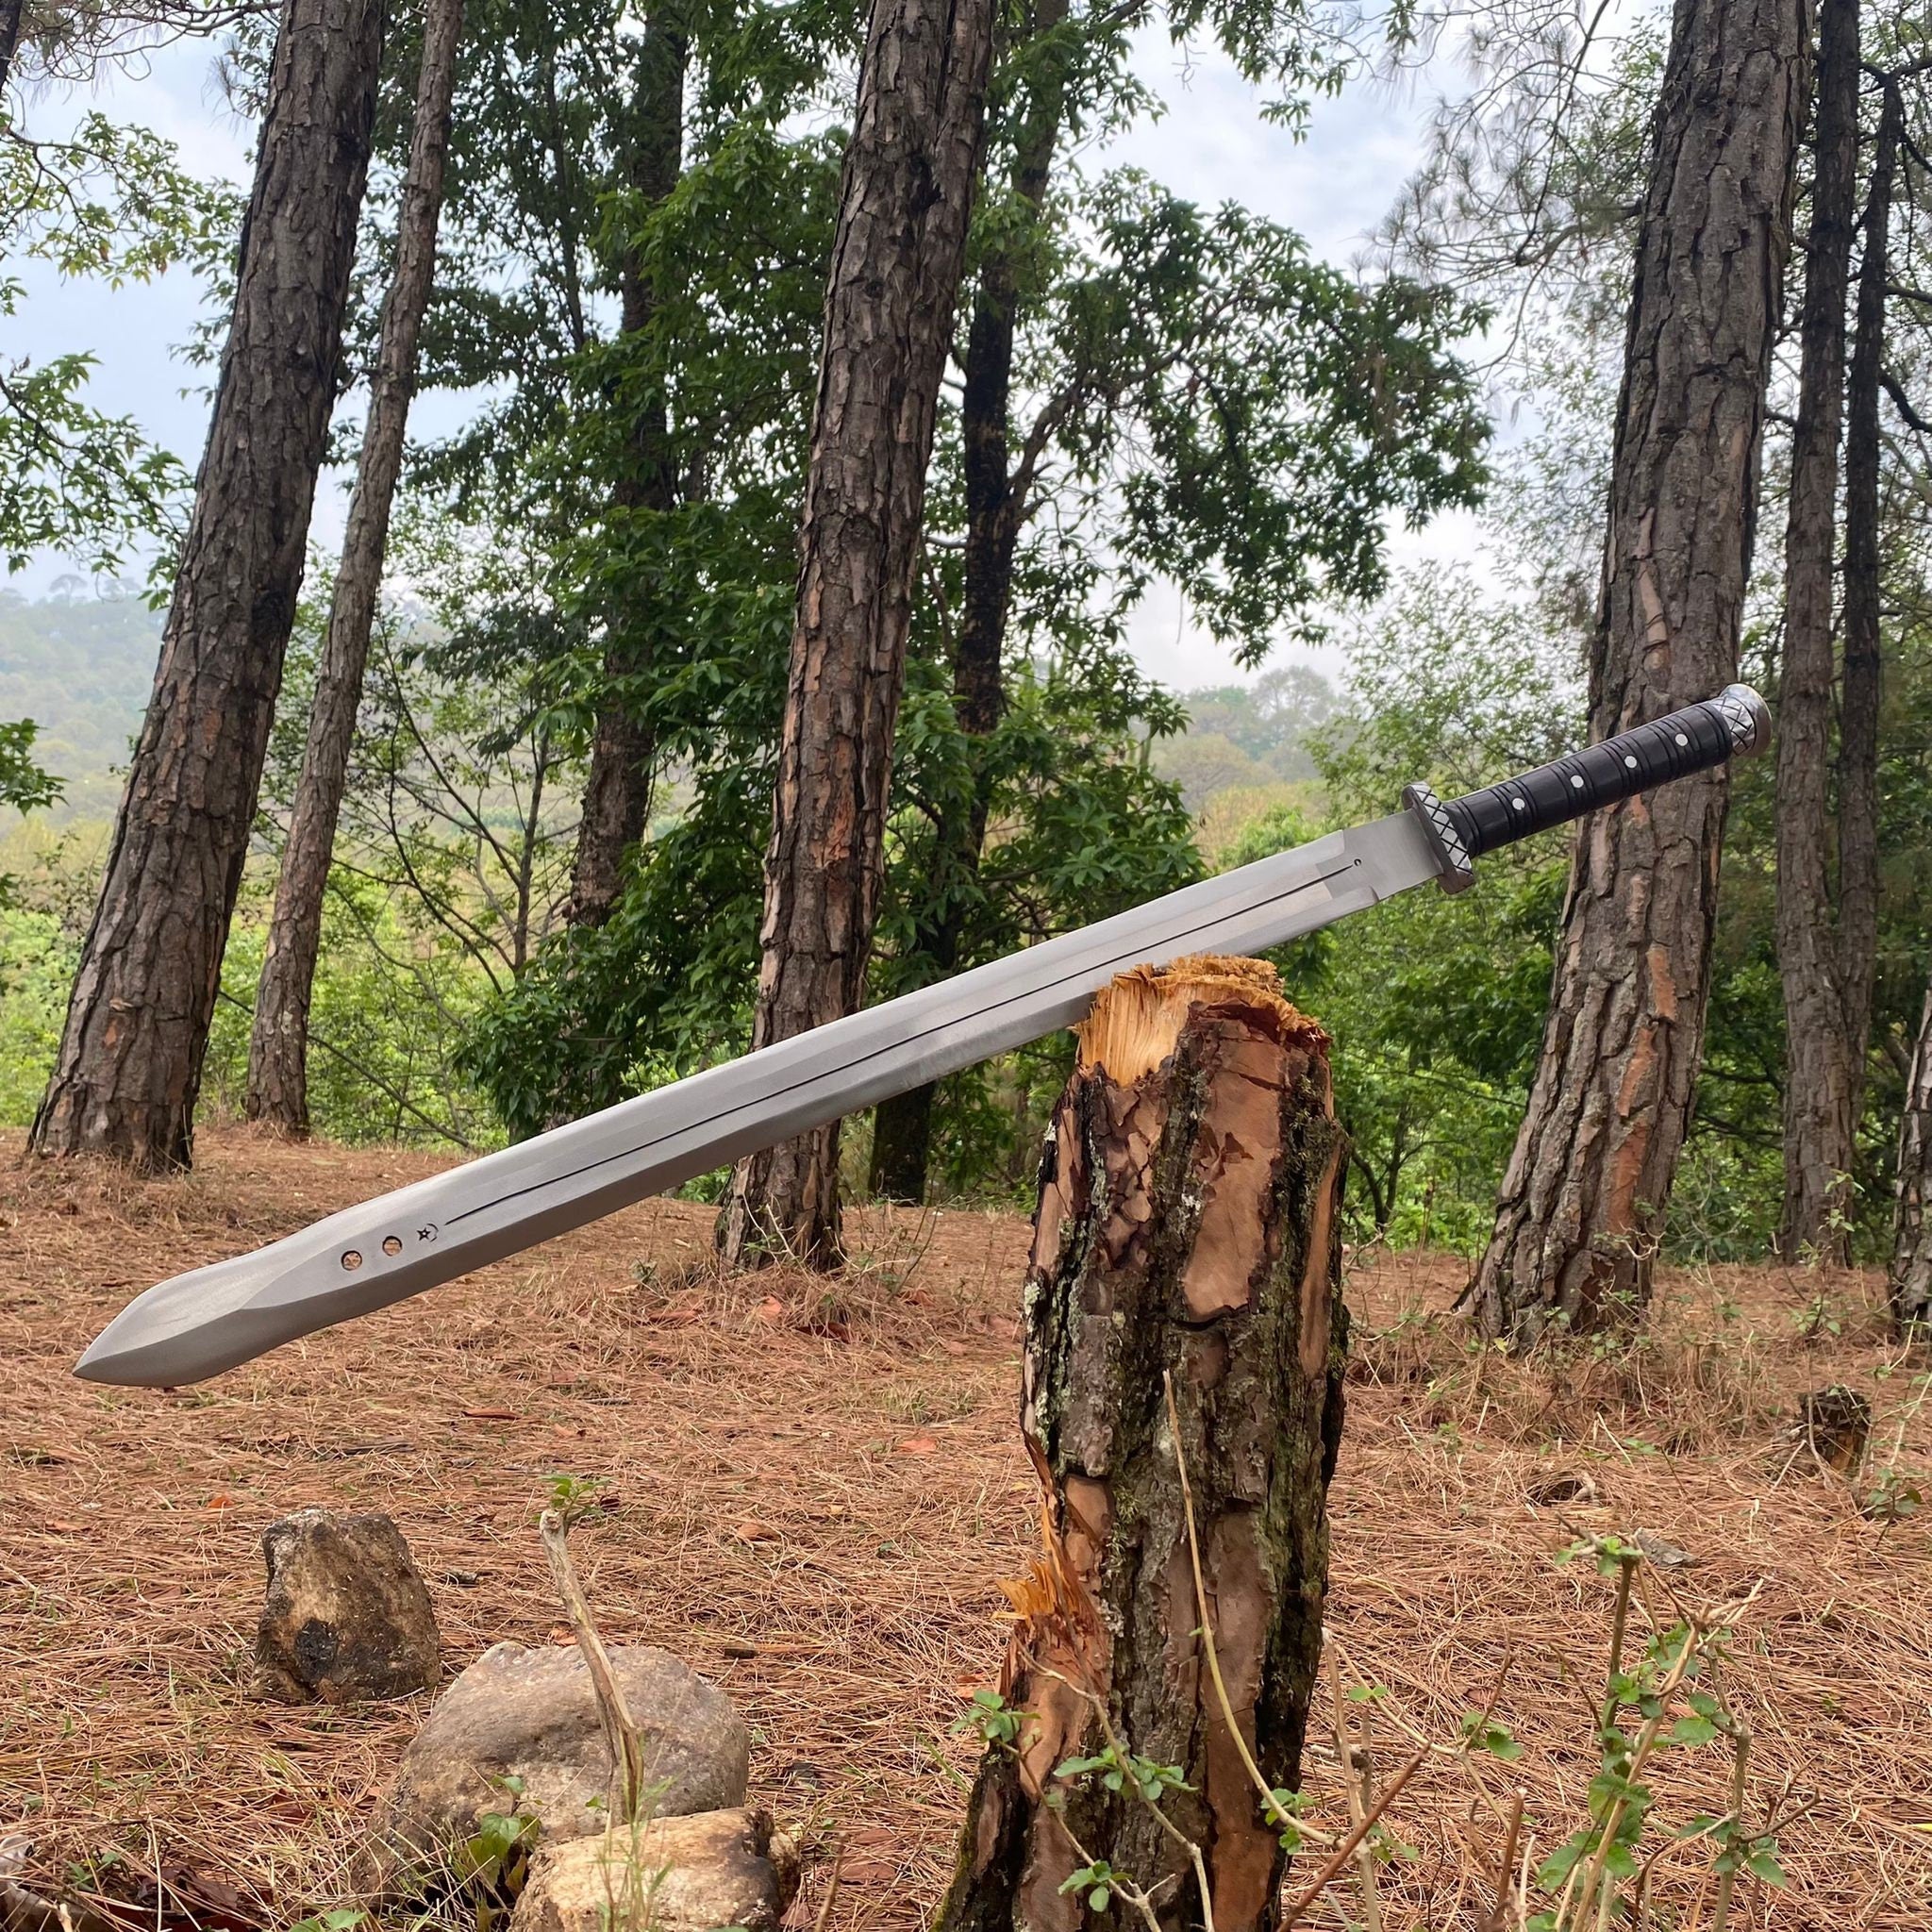 27 inches Blade Greek Achilles Sword, Tempered Leaf spring of